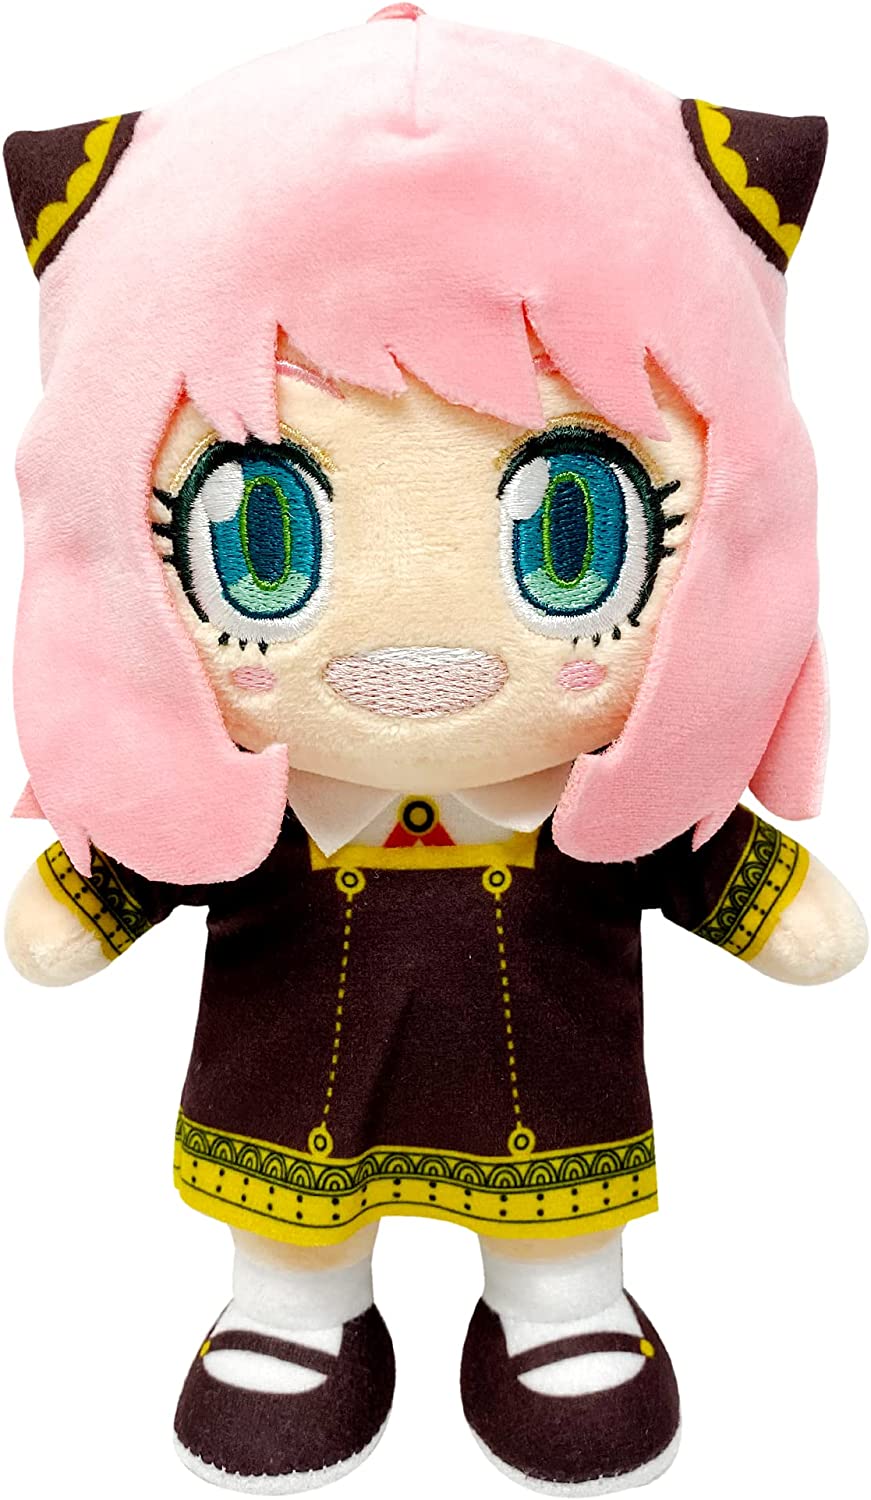 Spy X Family - Anya Forger Movable 7" Plush